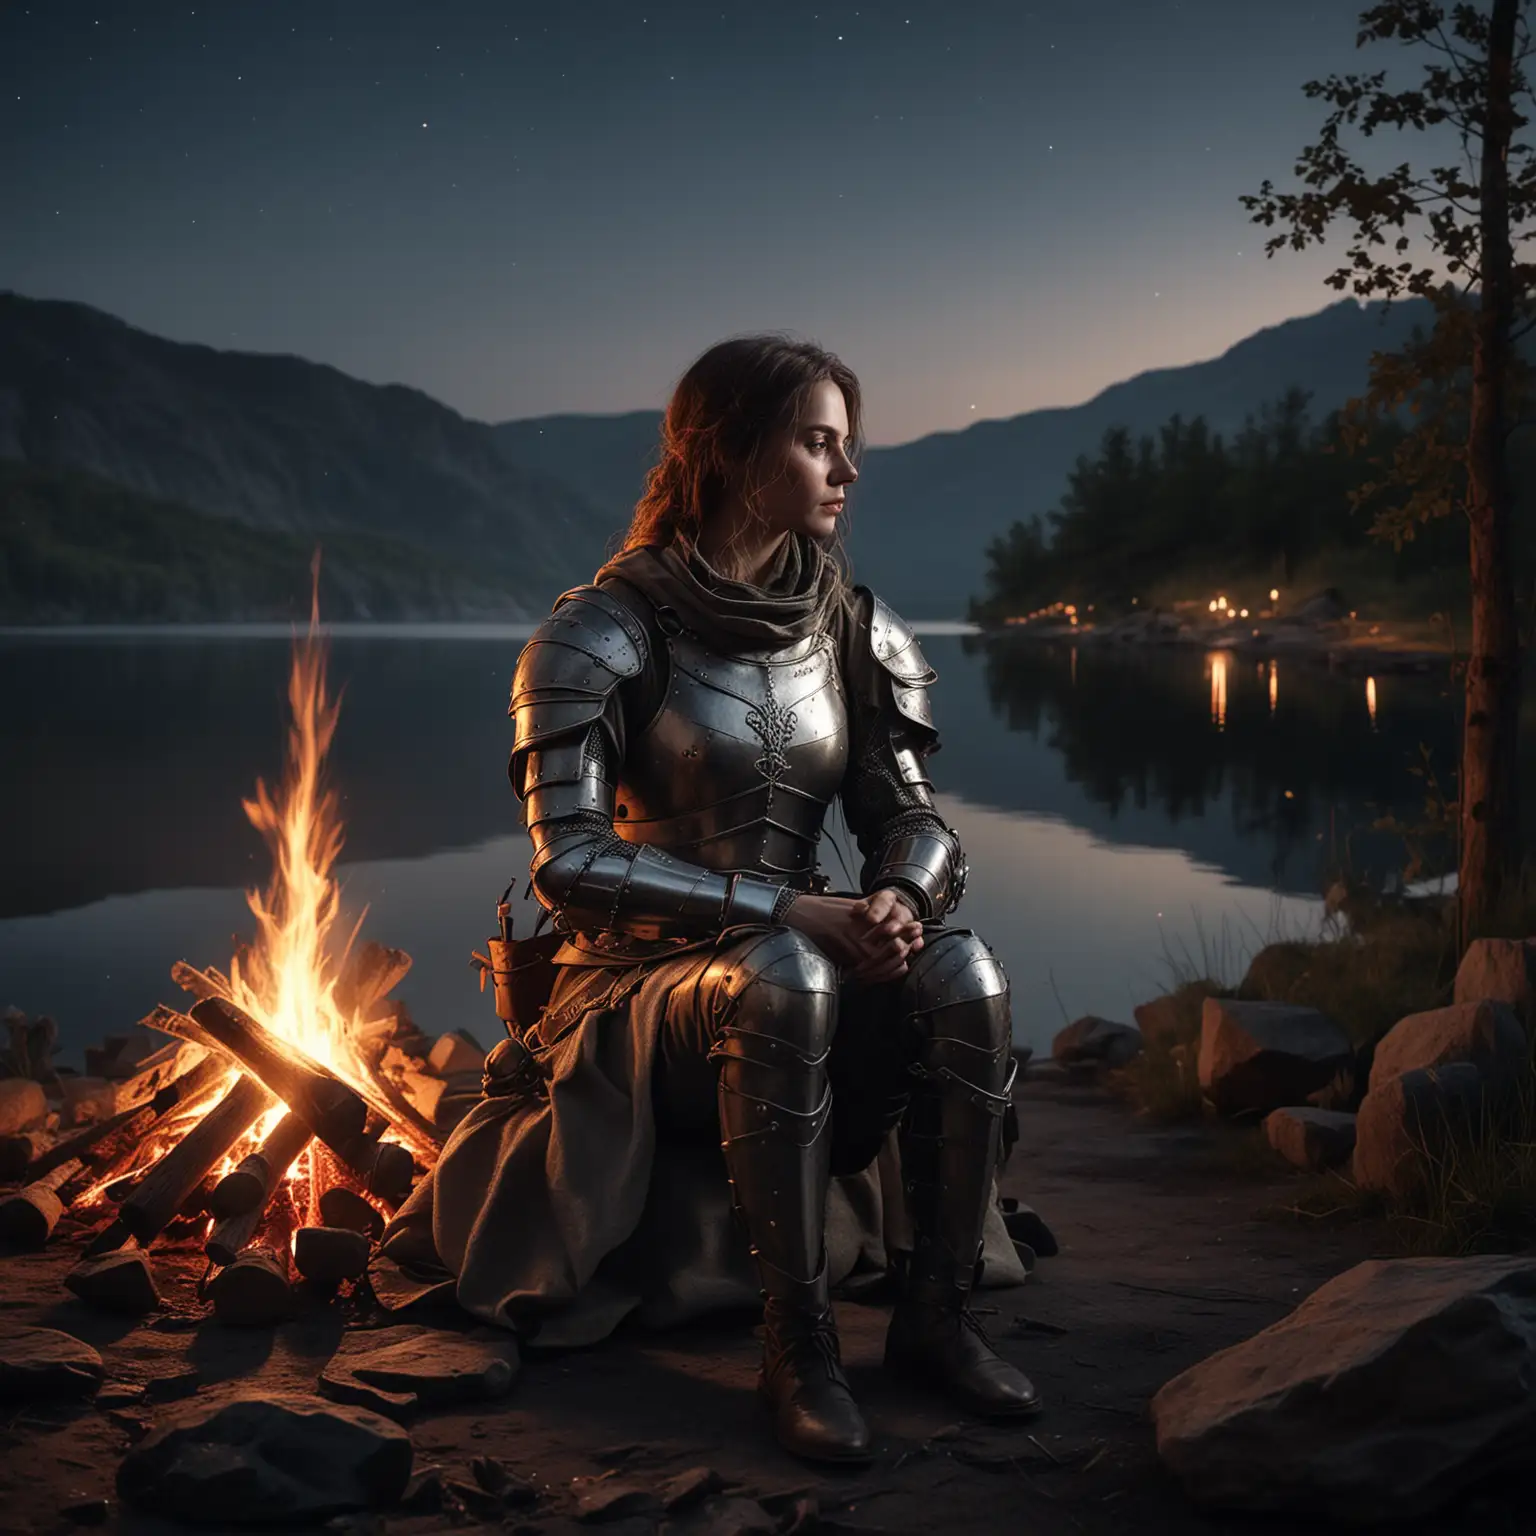 a woman in metal armor sits by a campfire, night, lake in the background, backpack nearby the campfire, medieval, realistic light